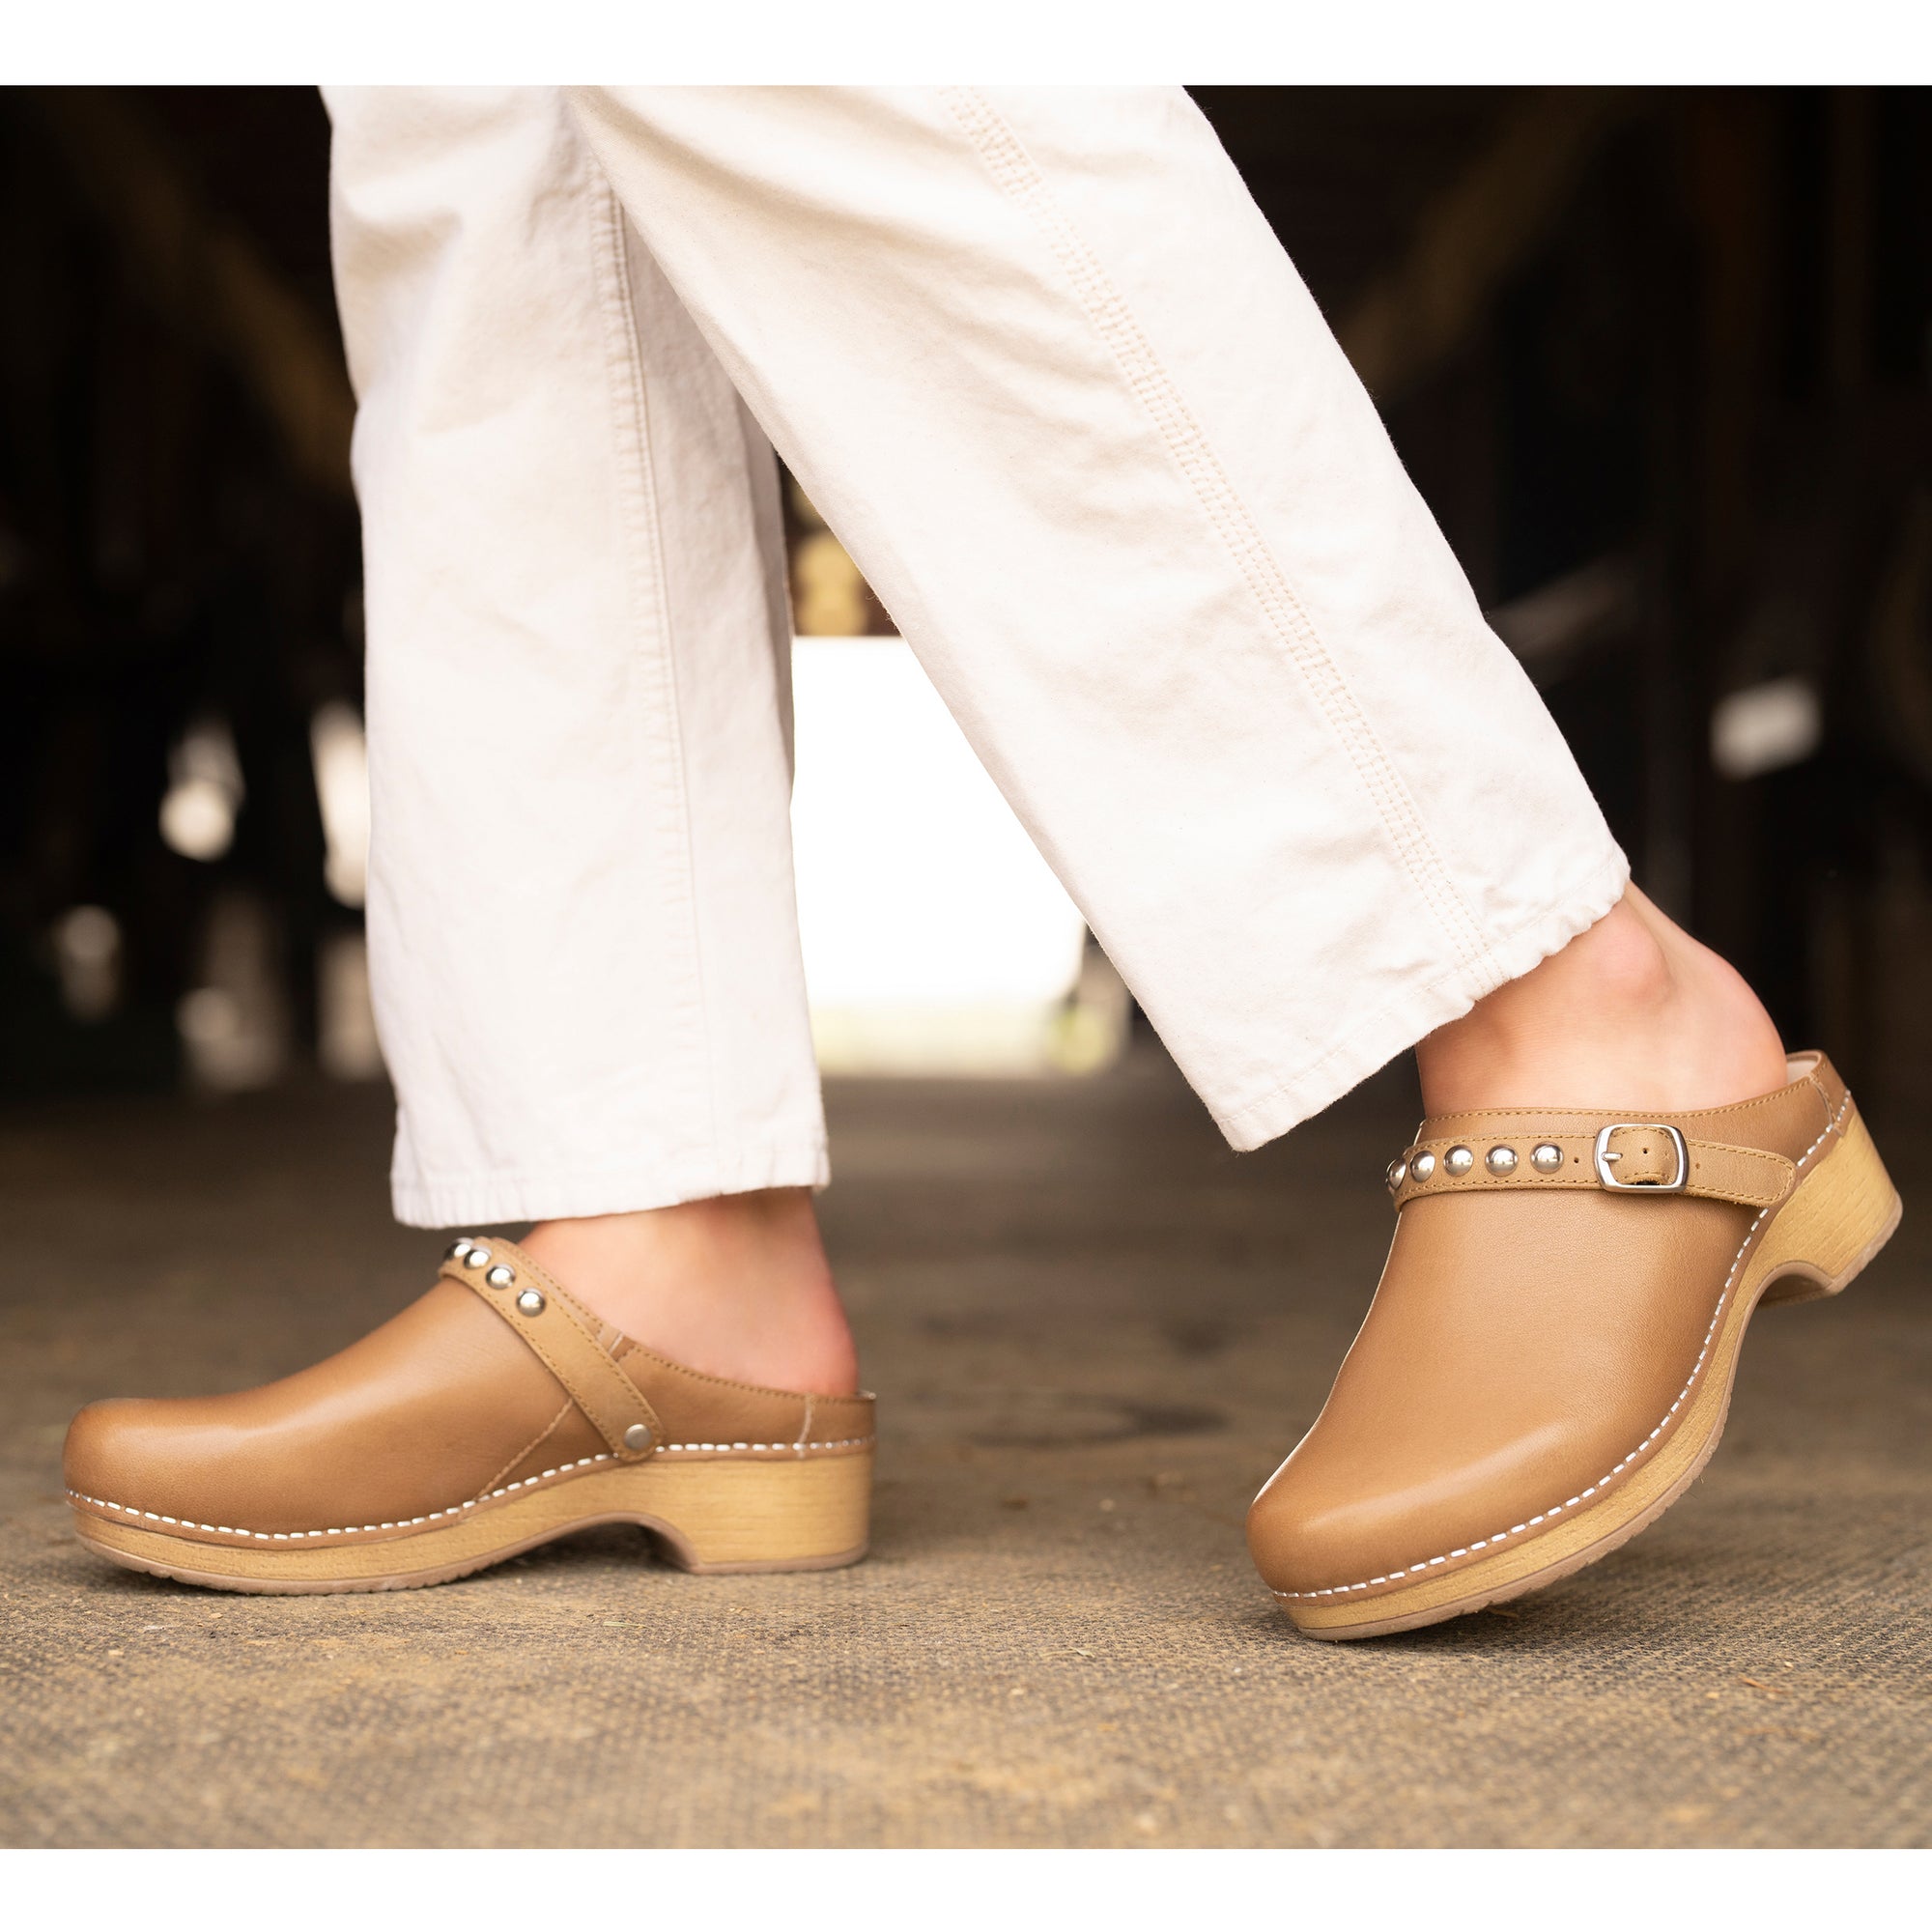 Stylish tan mule clog with trendy design.